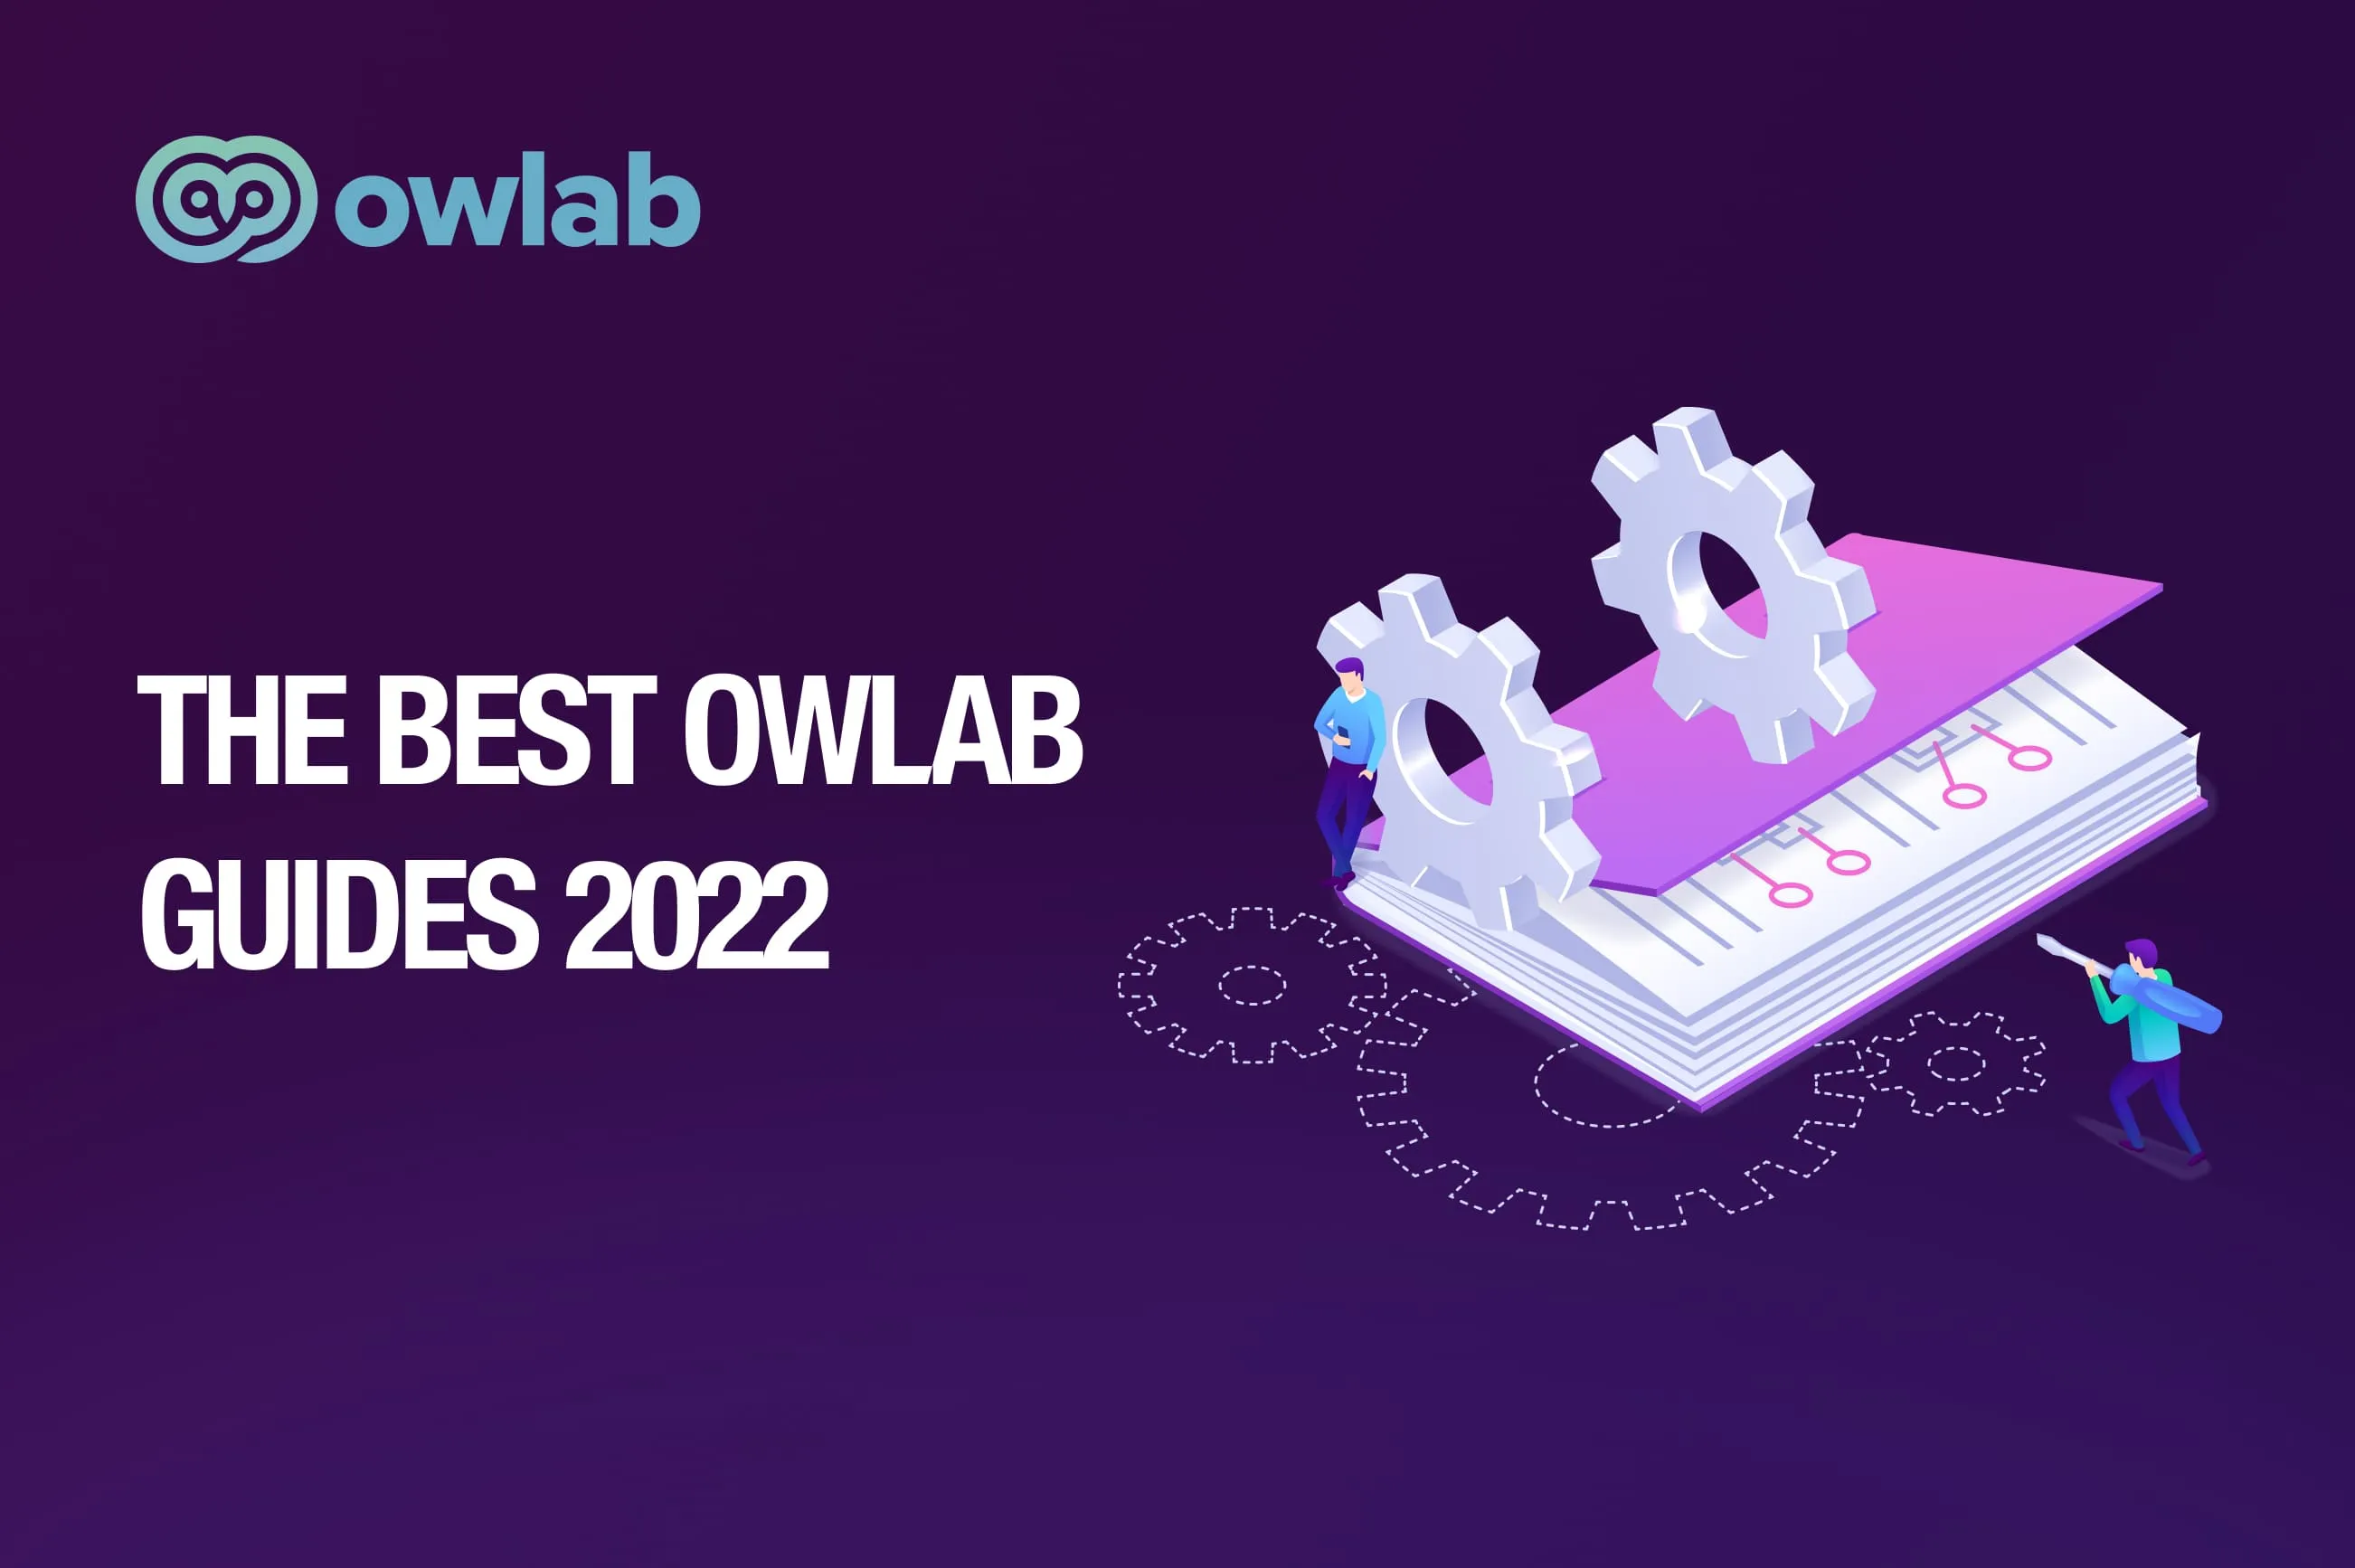 The Best Owlab Guides 2022